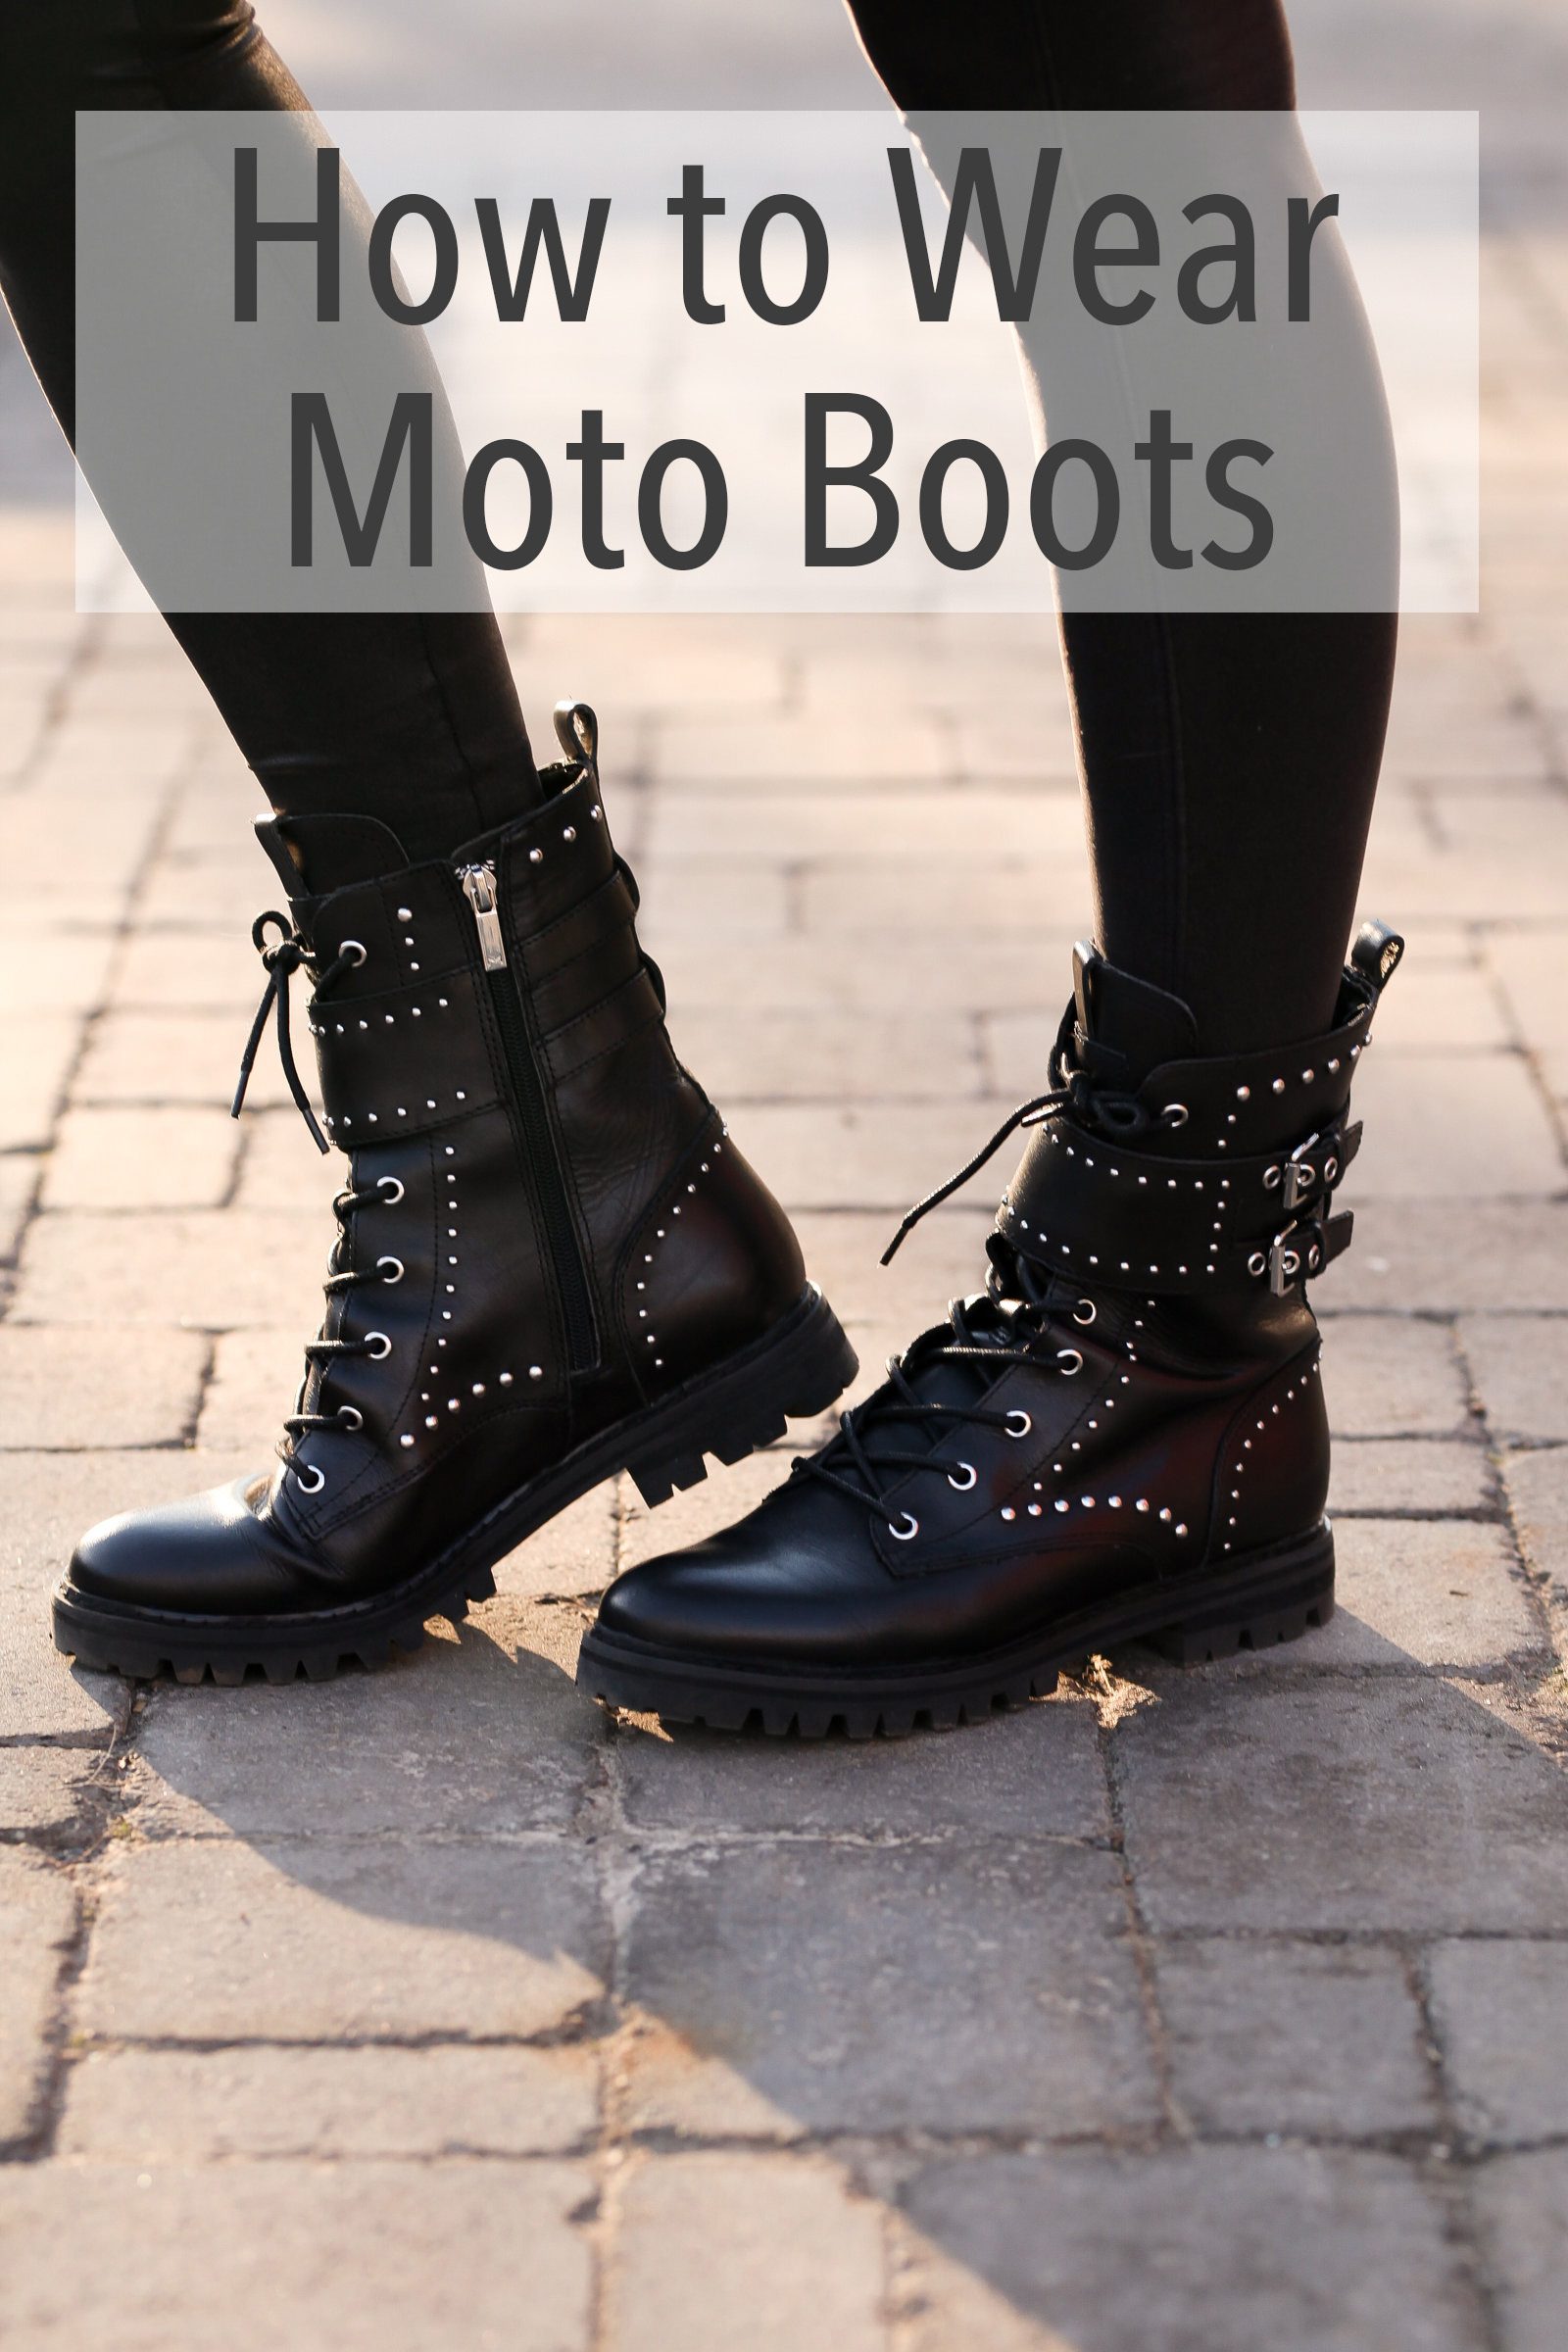 How To Wear Leather Motorcycle Boots